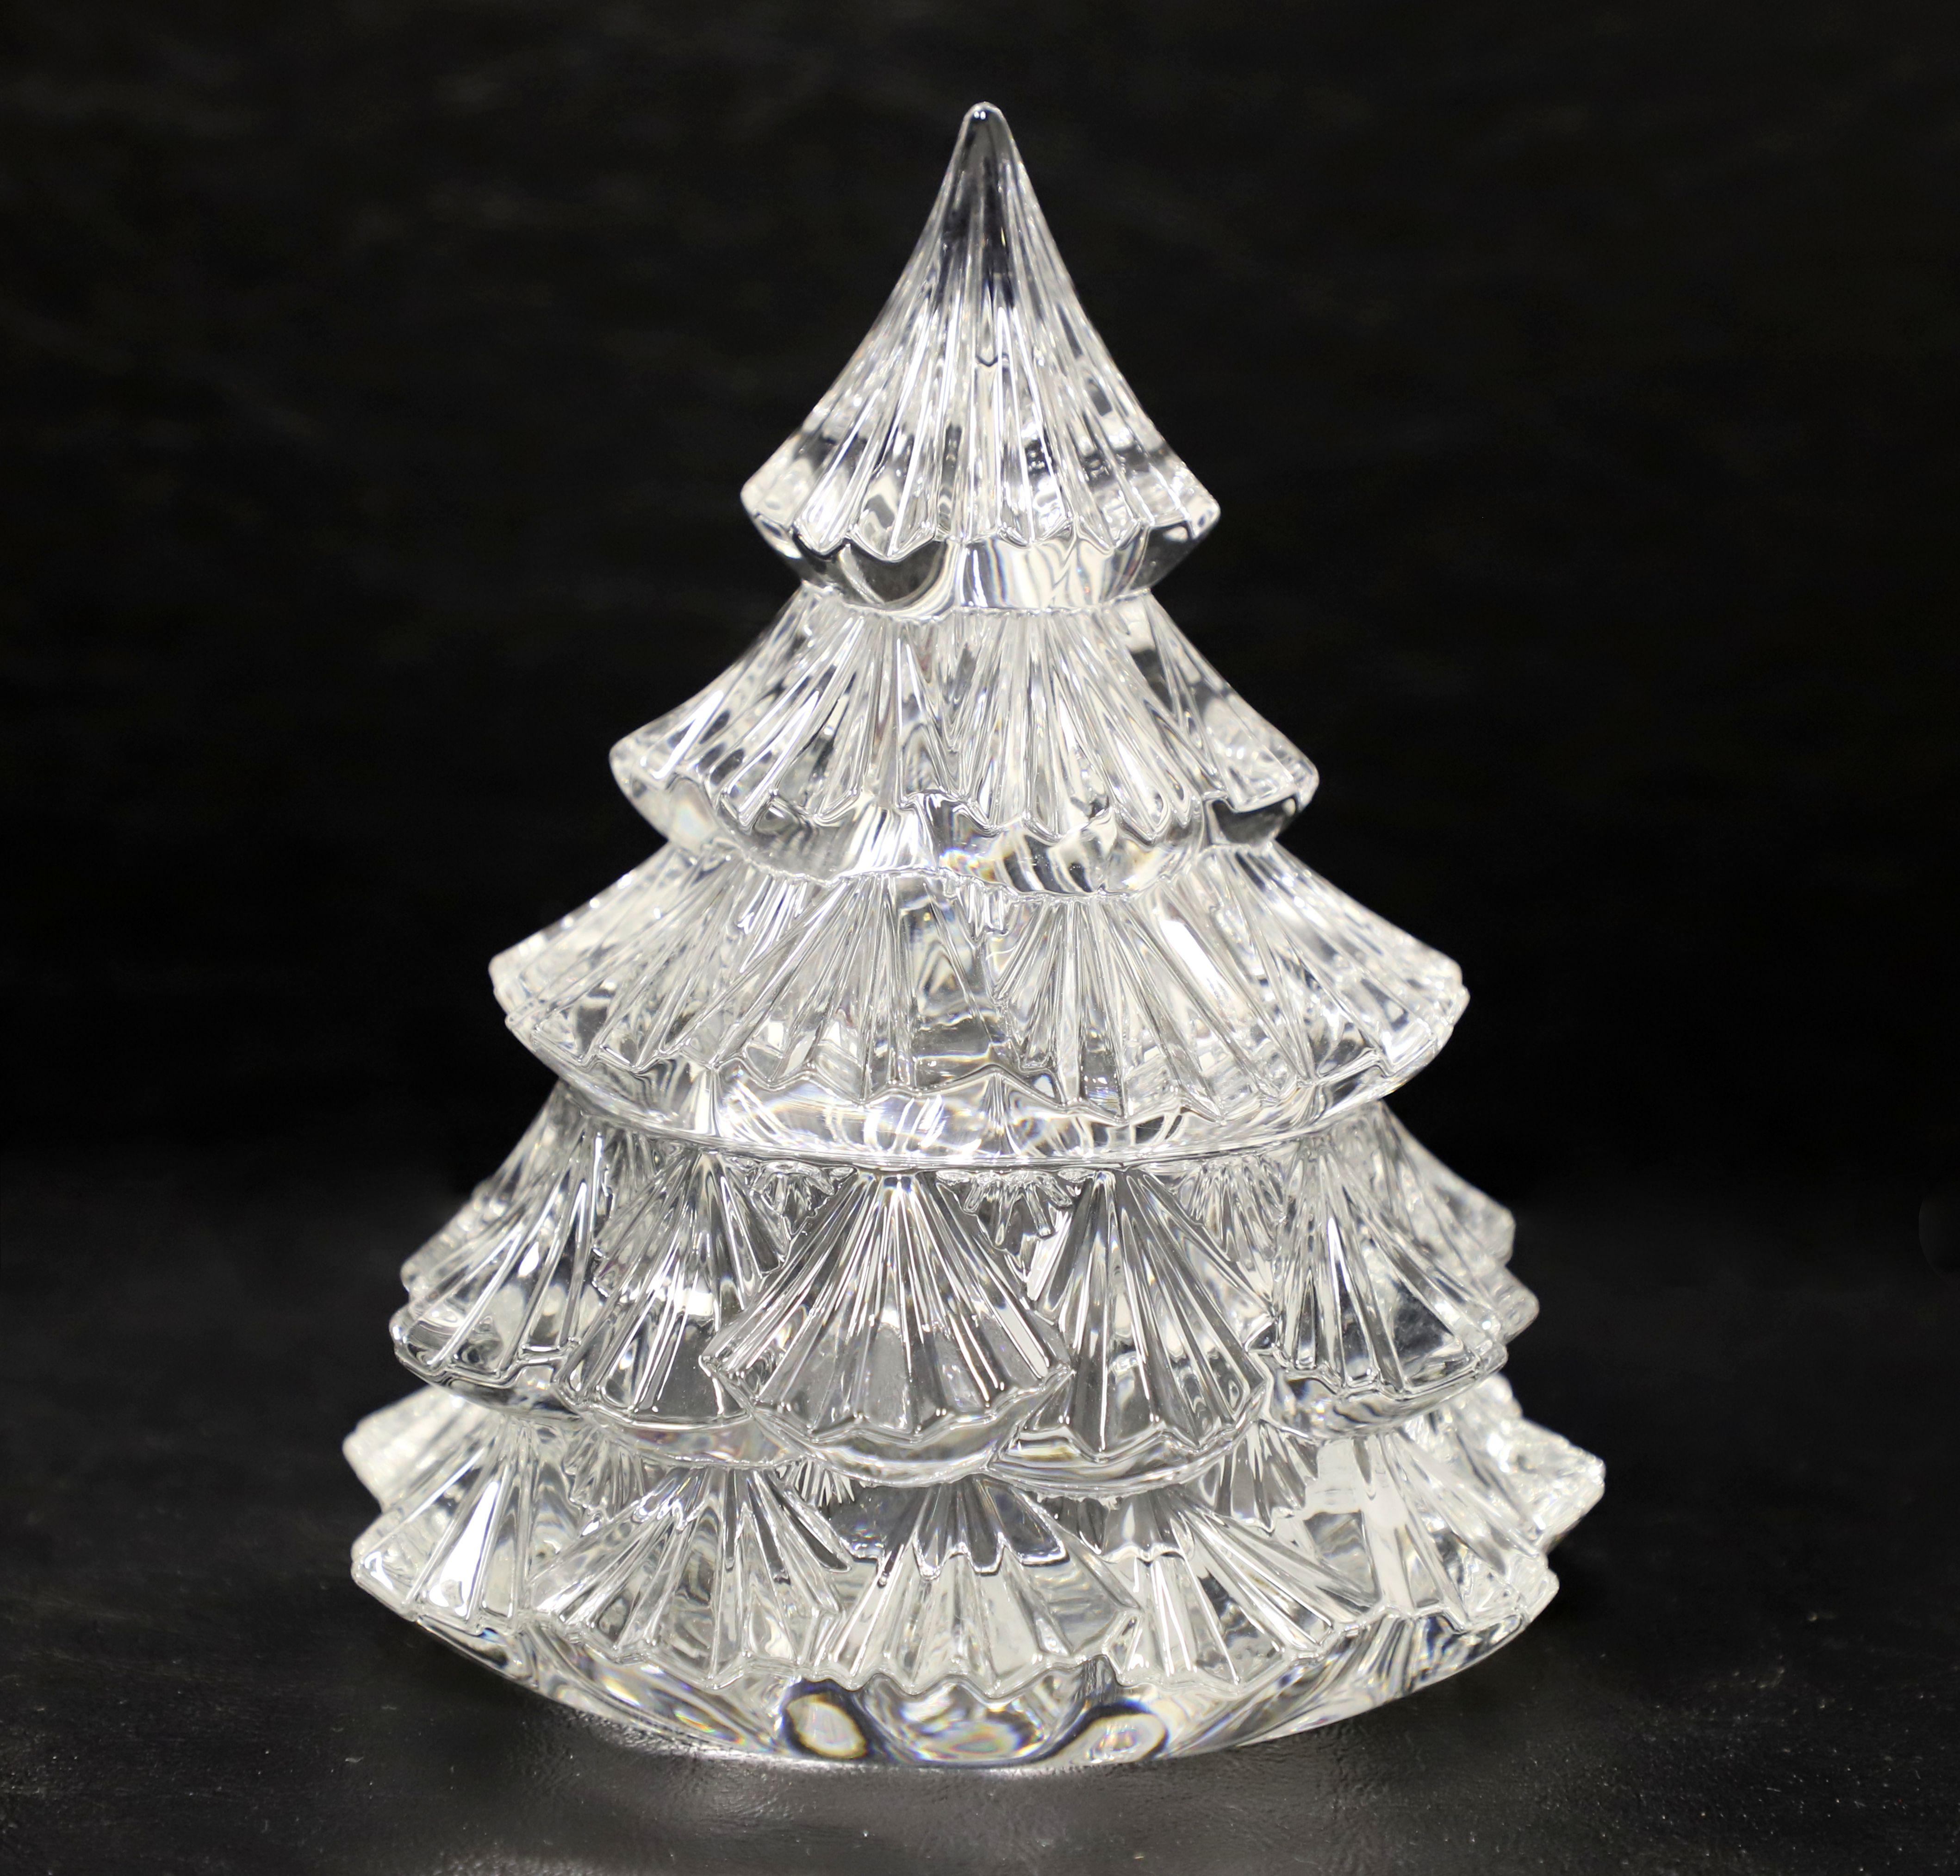 An Early 21st Century Christmas Tree candy dish by Marquis by Waterford. New in open box, not previously used. Clear crystal with a Christmas Tree design that opens in the center. Etched on bottom 